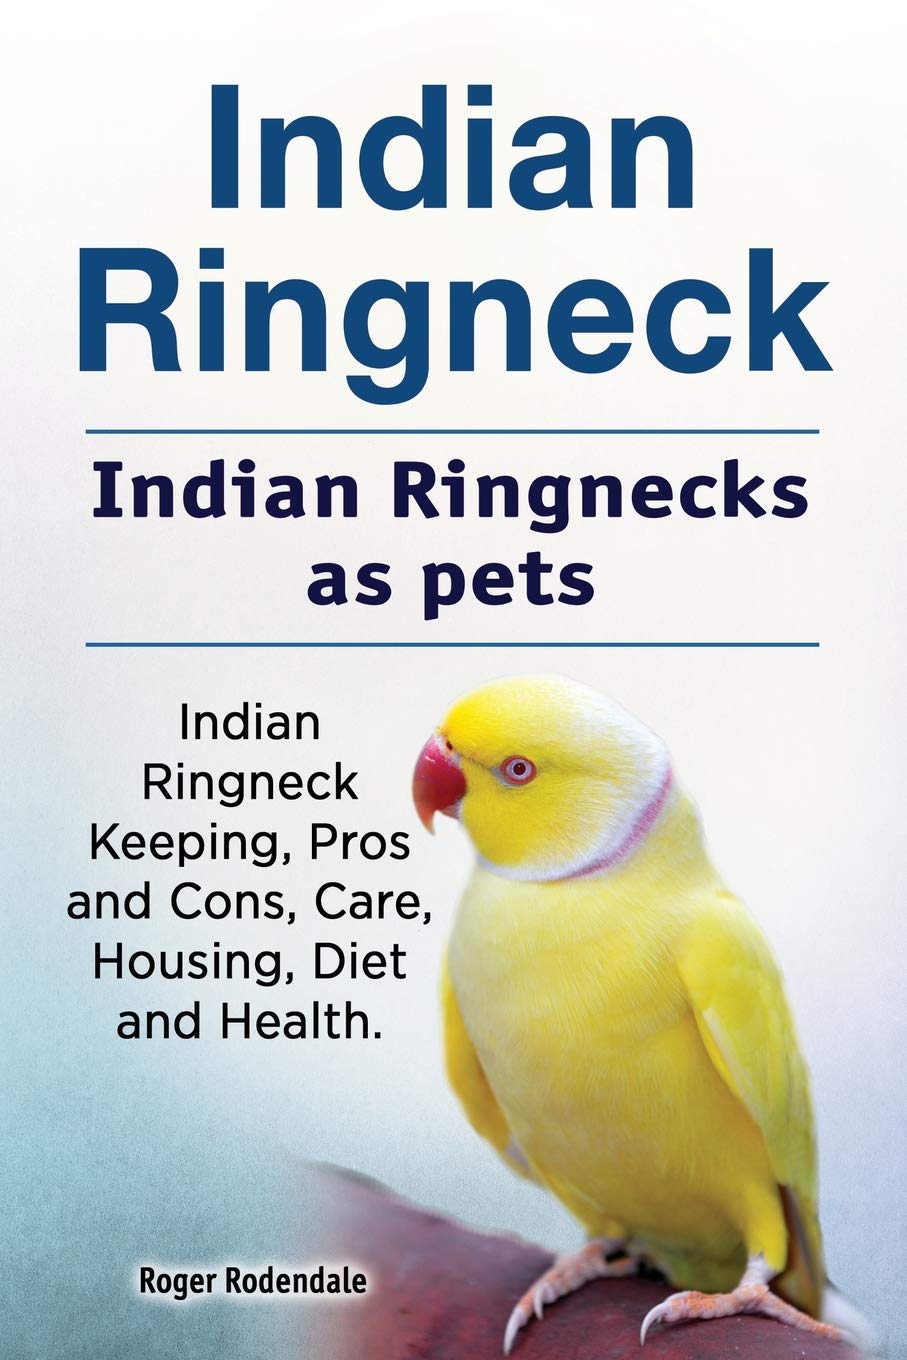 Indian Ringneck. Indian Ringnecks as pets. Indian Ringneck Keeping, Pros and Cons, Care, Housing, Diet and Health. (পেপারব্যাক)